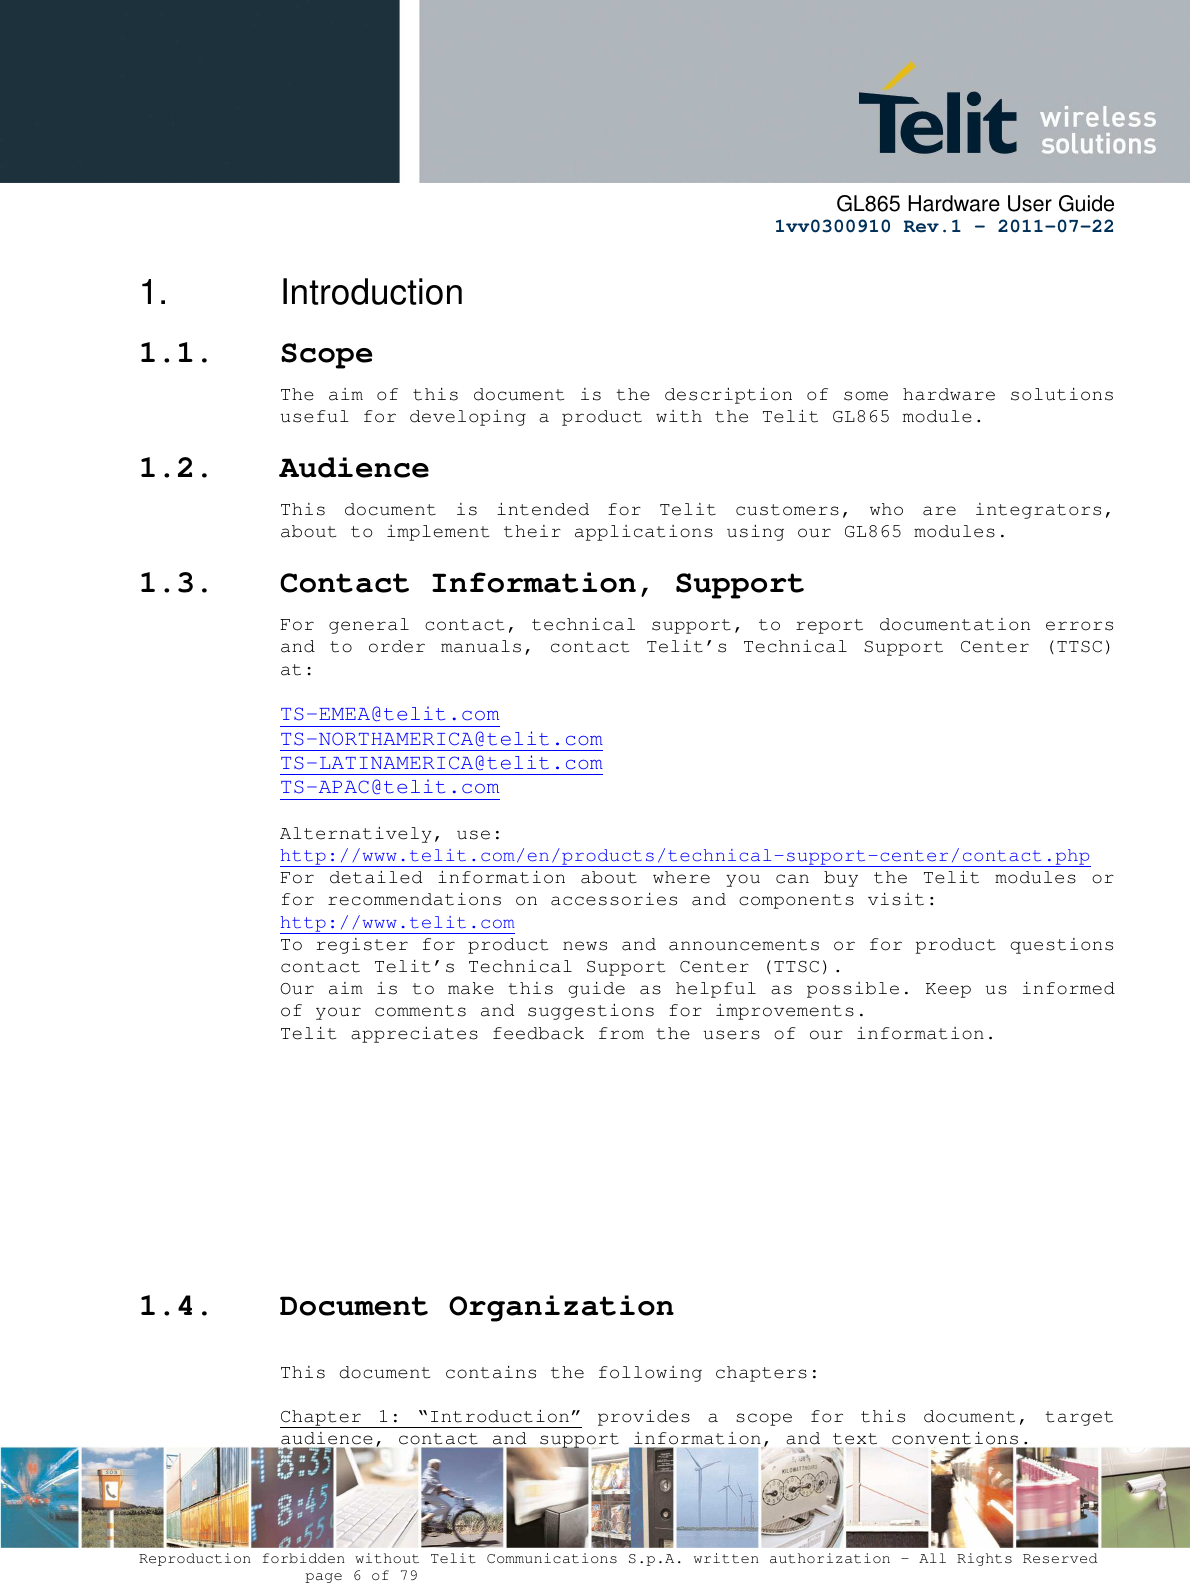      GL865 Hardware User Guide     1vv0300910 Rev.1 – 2011-07-22       Reproduction forbidden without Telit Communications S.p.A. written authorization - All Rights Reserved    page 6 of 79  1.  Introduction 1.1. Scope The aim of this document is the description of some hardware solutions useful for developing a product with the Telit GL865 module. 1.2. Audience This  document  is  intended  for  Telit  customers,  who  are  integrators, about to implement their applications using our GL865 modules. 1.3. Contact Information, Support For general contact, technical support, to report documentation errors and  to  order  manuals,  contact  Telit’s  Technical  Support  Center (TTSC) at:  TS-EMEA@telit.com TS-NORTHAMERICA@telit.com TS-LATINAMERICA@telit.com TS-APAC@telit.com  Alternatively, use:  http://www.telit.com/en/products/technical-support-center/contact.php For detailed information about where you can buy the Telit modules or for recommendations on accessories and components visit:  http://www.telit.com To register for product news and announcements or for product questions contact Telit’s Technical Support Center (TTSC). Our aim is to make this guide as helpful as possible. Keep us informed of your comments and suggestions for improvements. Telit appreciates feedback from the users of our information.           1.4. Document Organization  This document contains the following chapters:  Chapter  1:  “Introduction”  provides  a  scope  for  this  document,  target audience, contact and support information, and text conventions. 